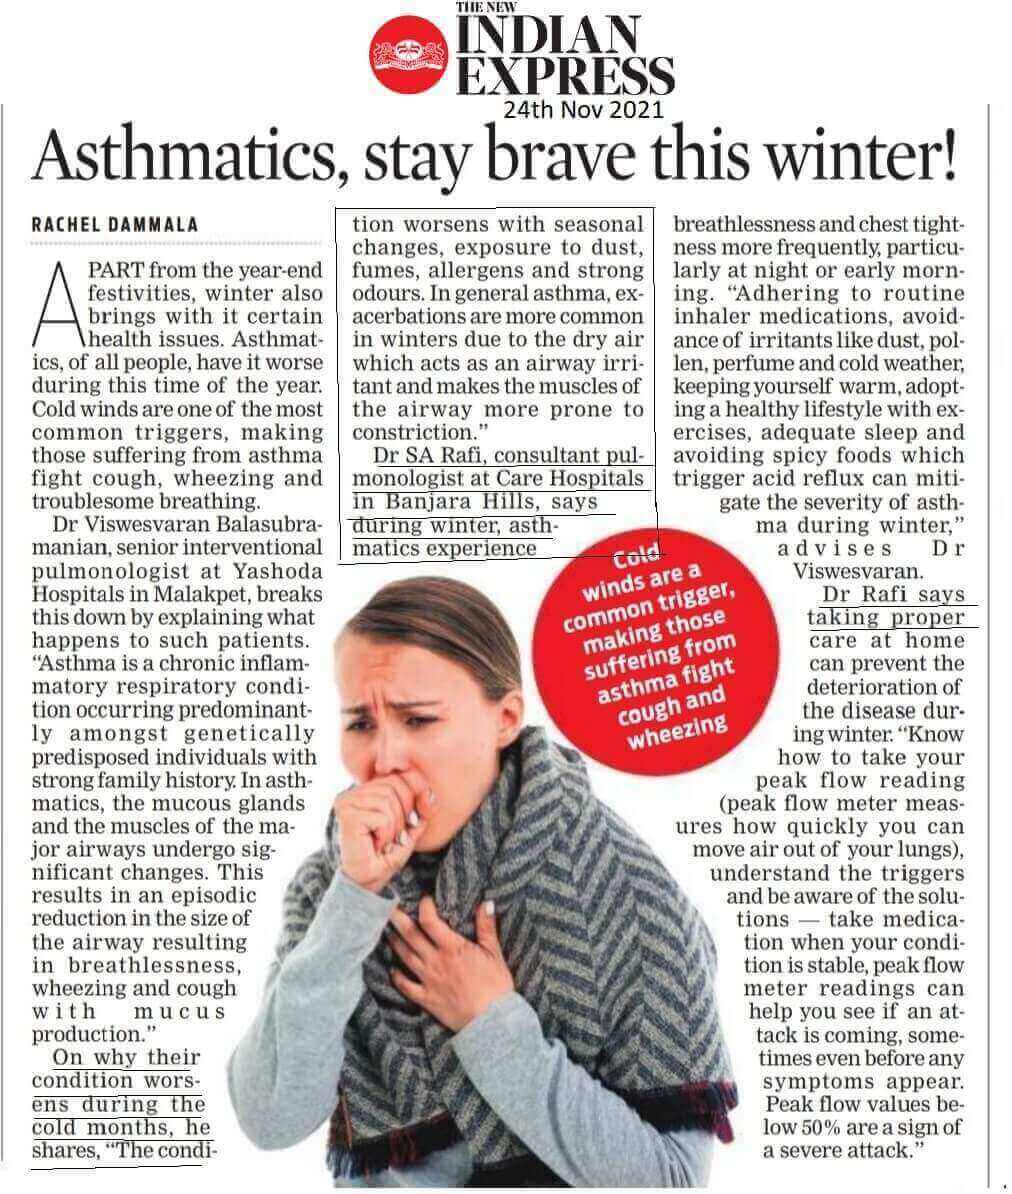 Asthma Problems in Winter article by Dr. S A Rafi - Consultant Pulmonologist